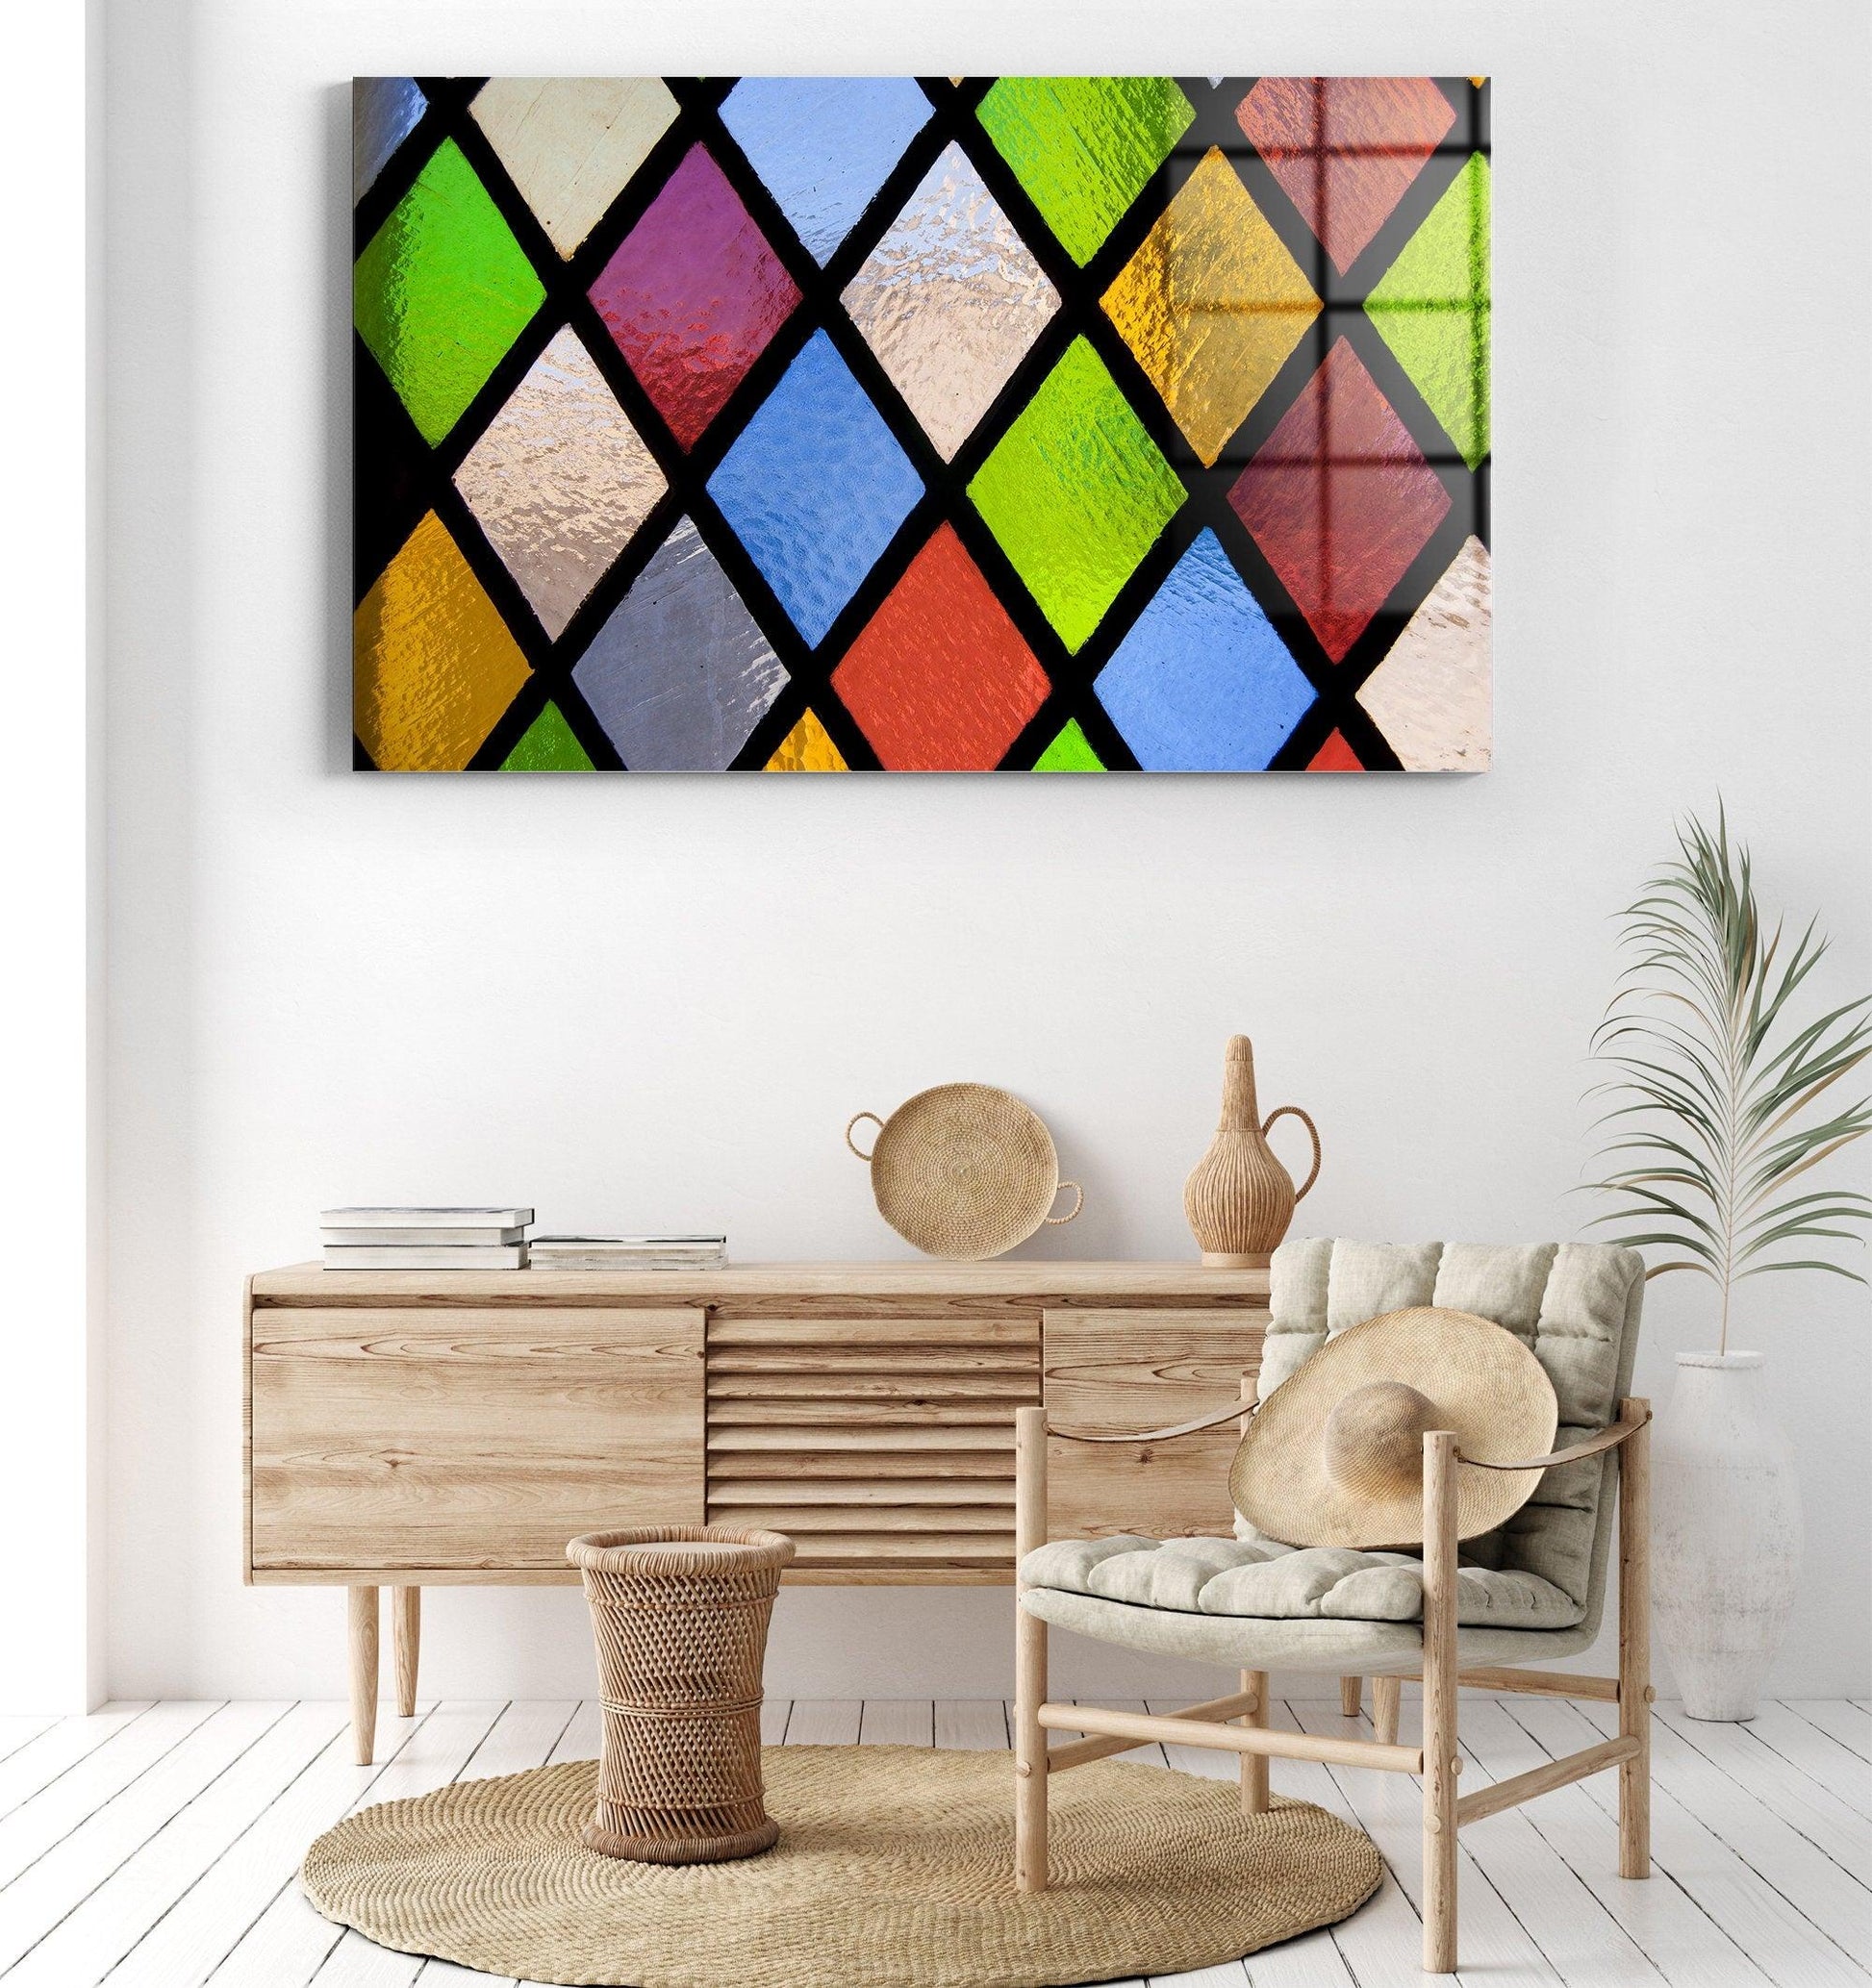 Stained Glass Wall Art | Home Decoration, House Warming Gift, Wall Hangings, Glass Printing, Tempered Glass Wall Art, Large Wall Decor - TrendiArt